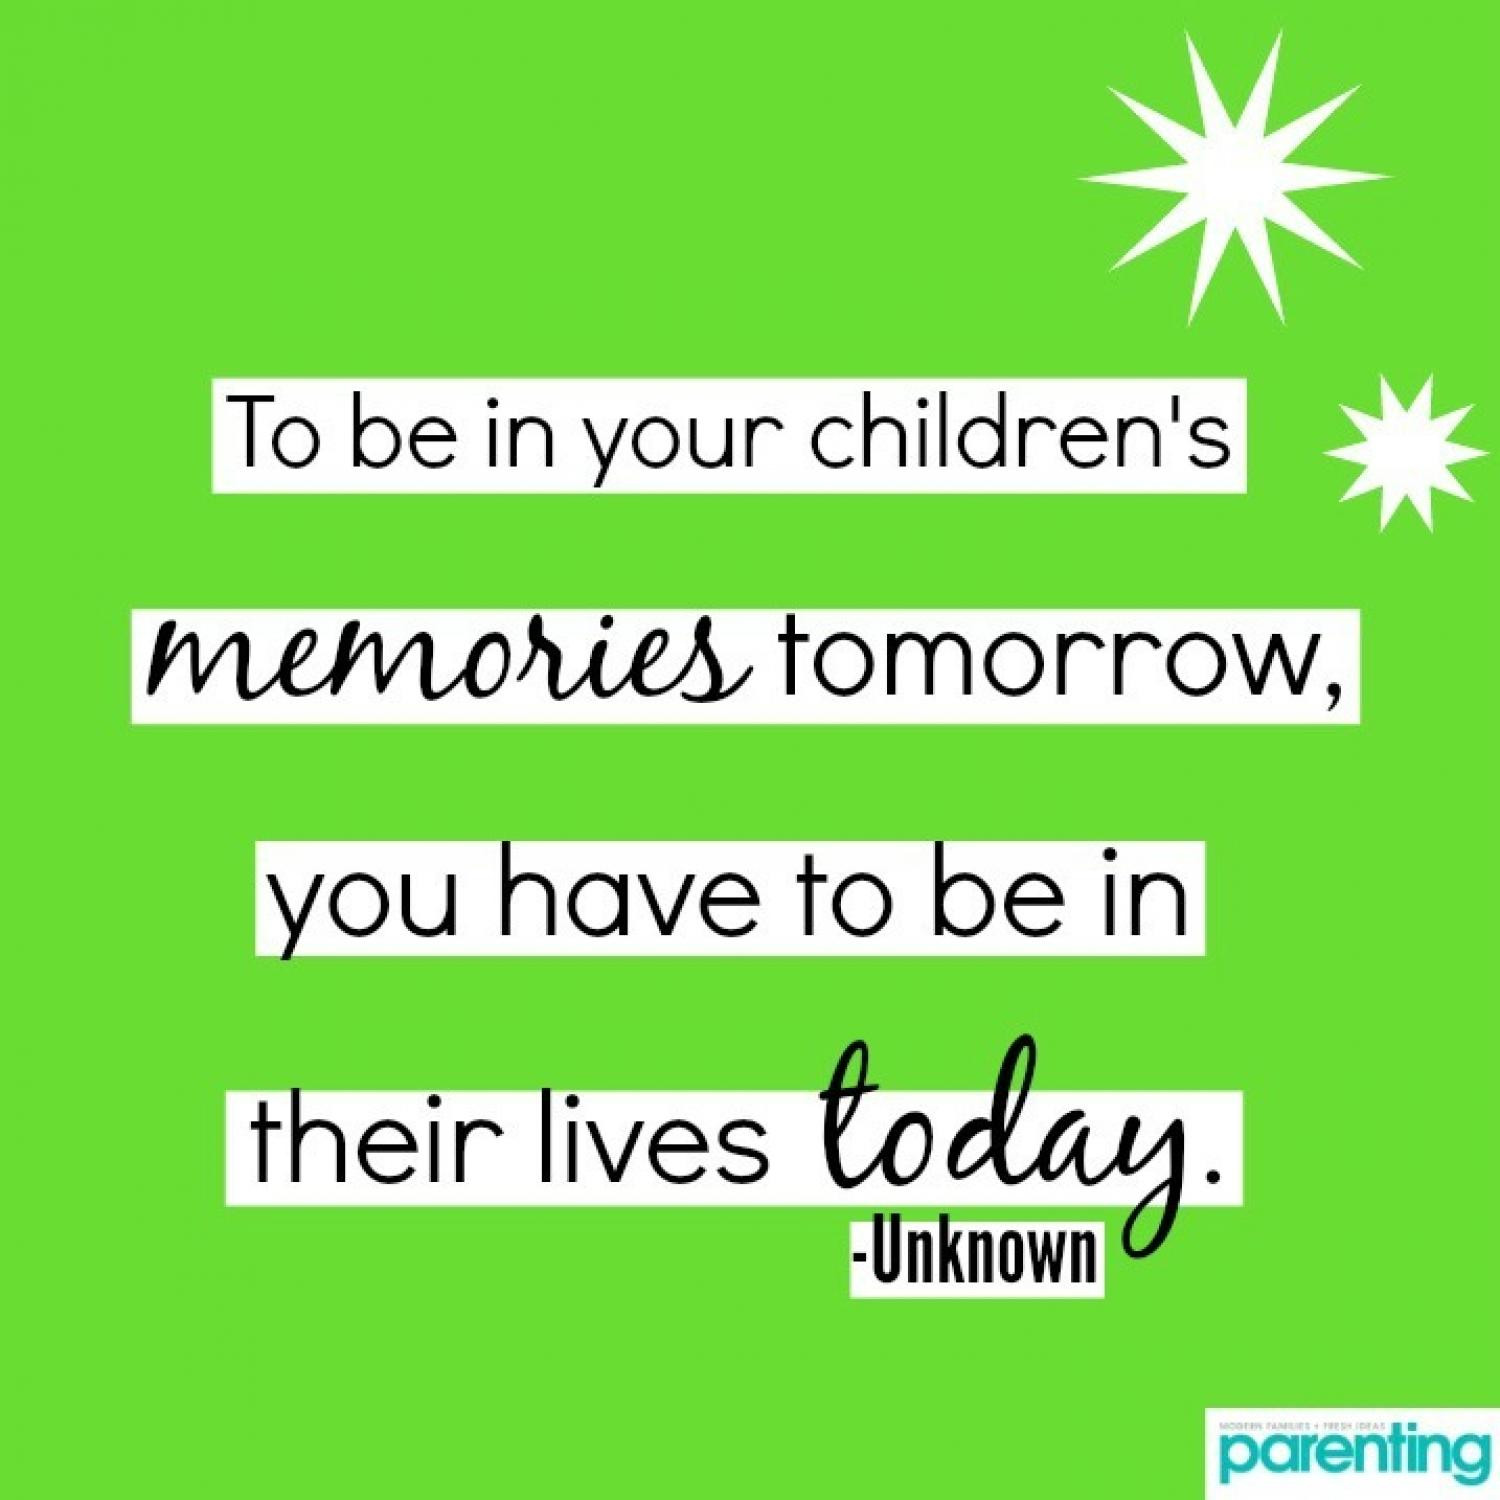 Parent And Children Quotes
 17 Amazing Parenting Quotes That Will Make You a Better